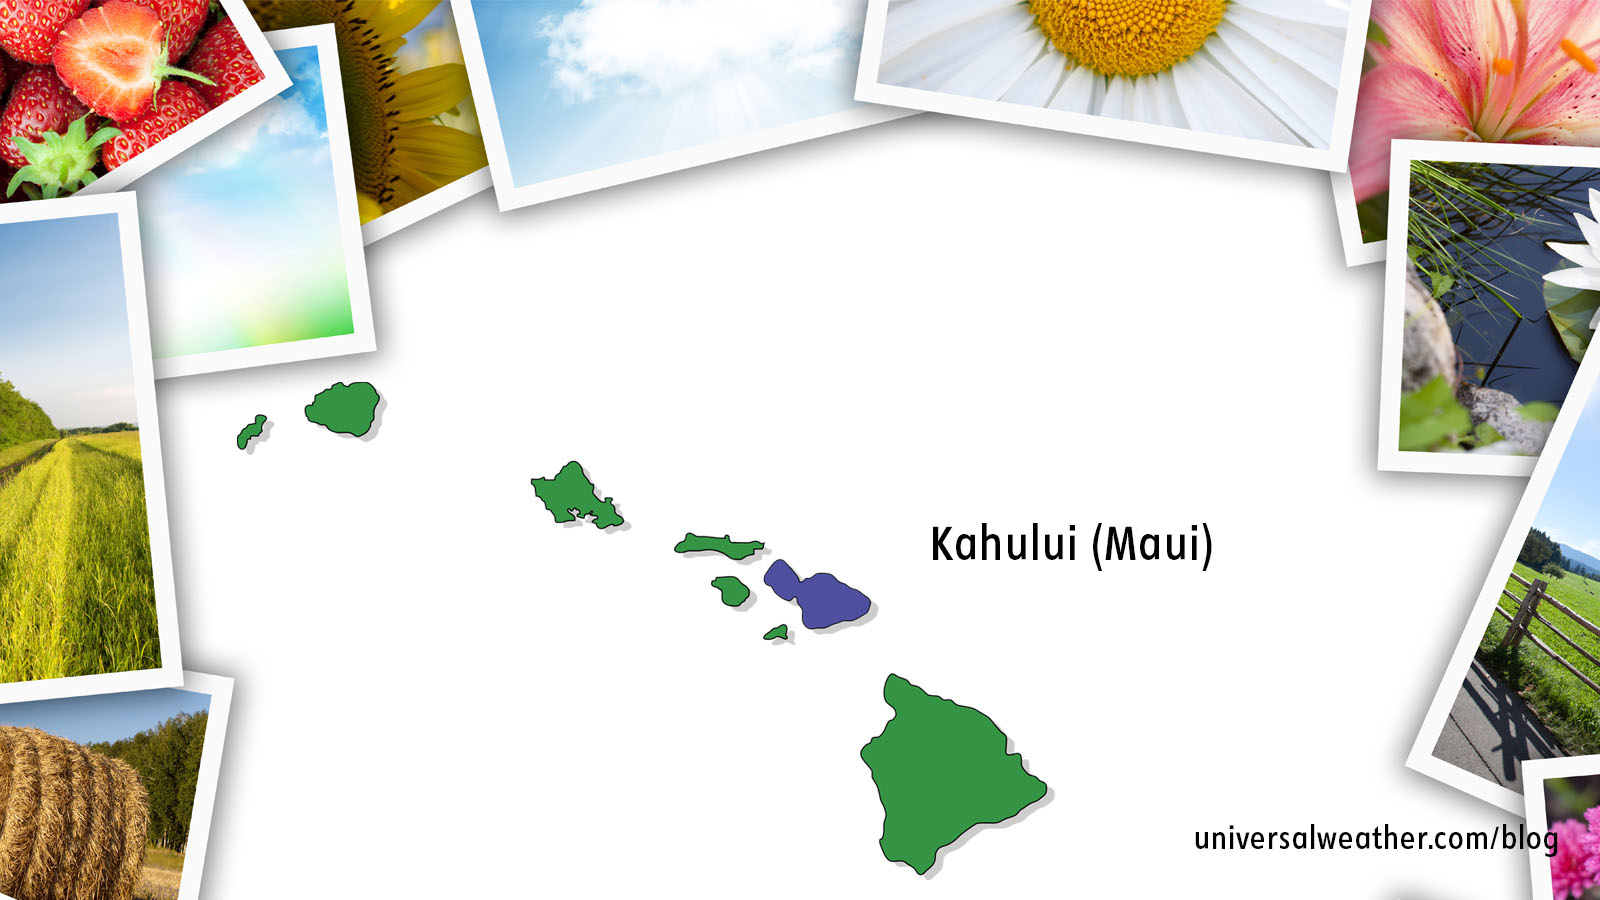 Top Operating Considerations for Kahului Maui (PHOG)